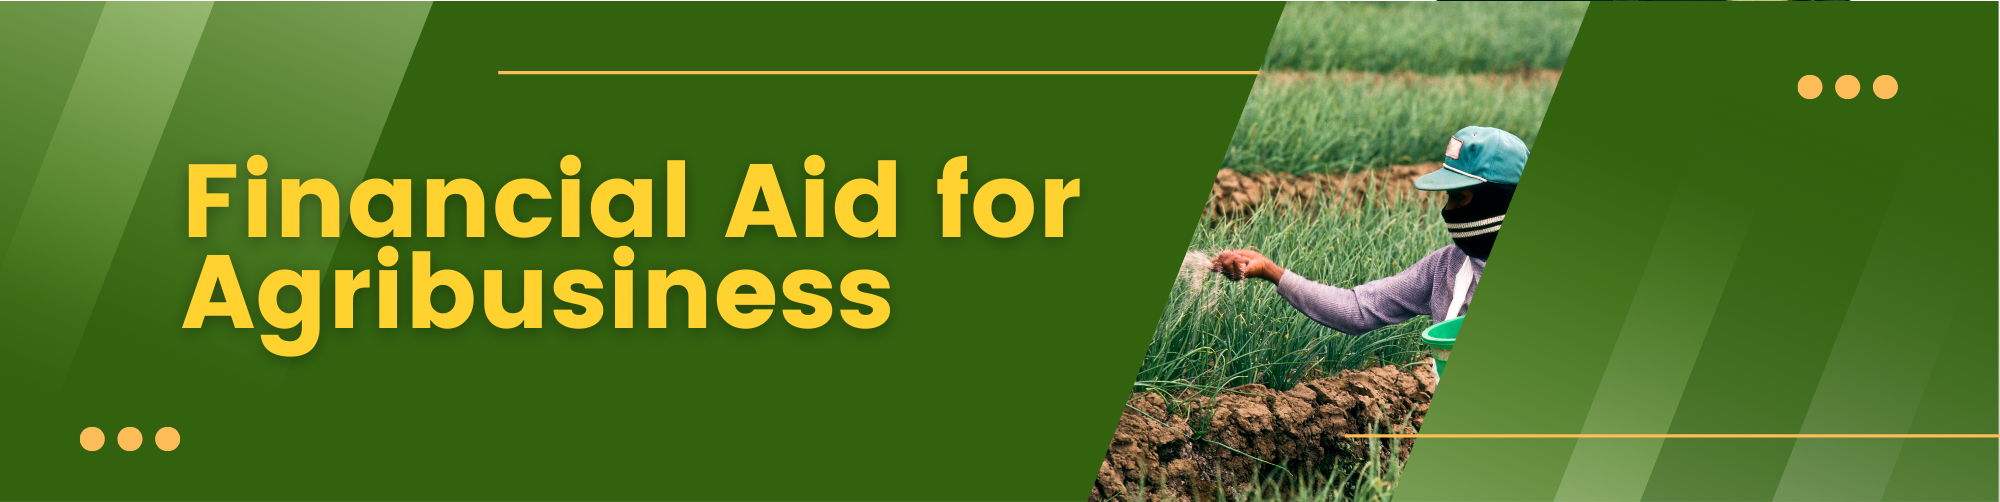 Financial Aid for Agribusiness Banner 12 -diarynigracia